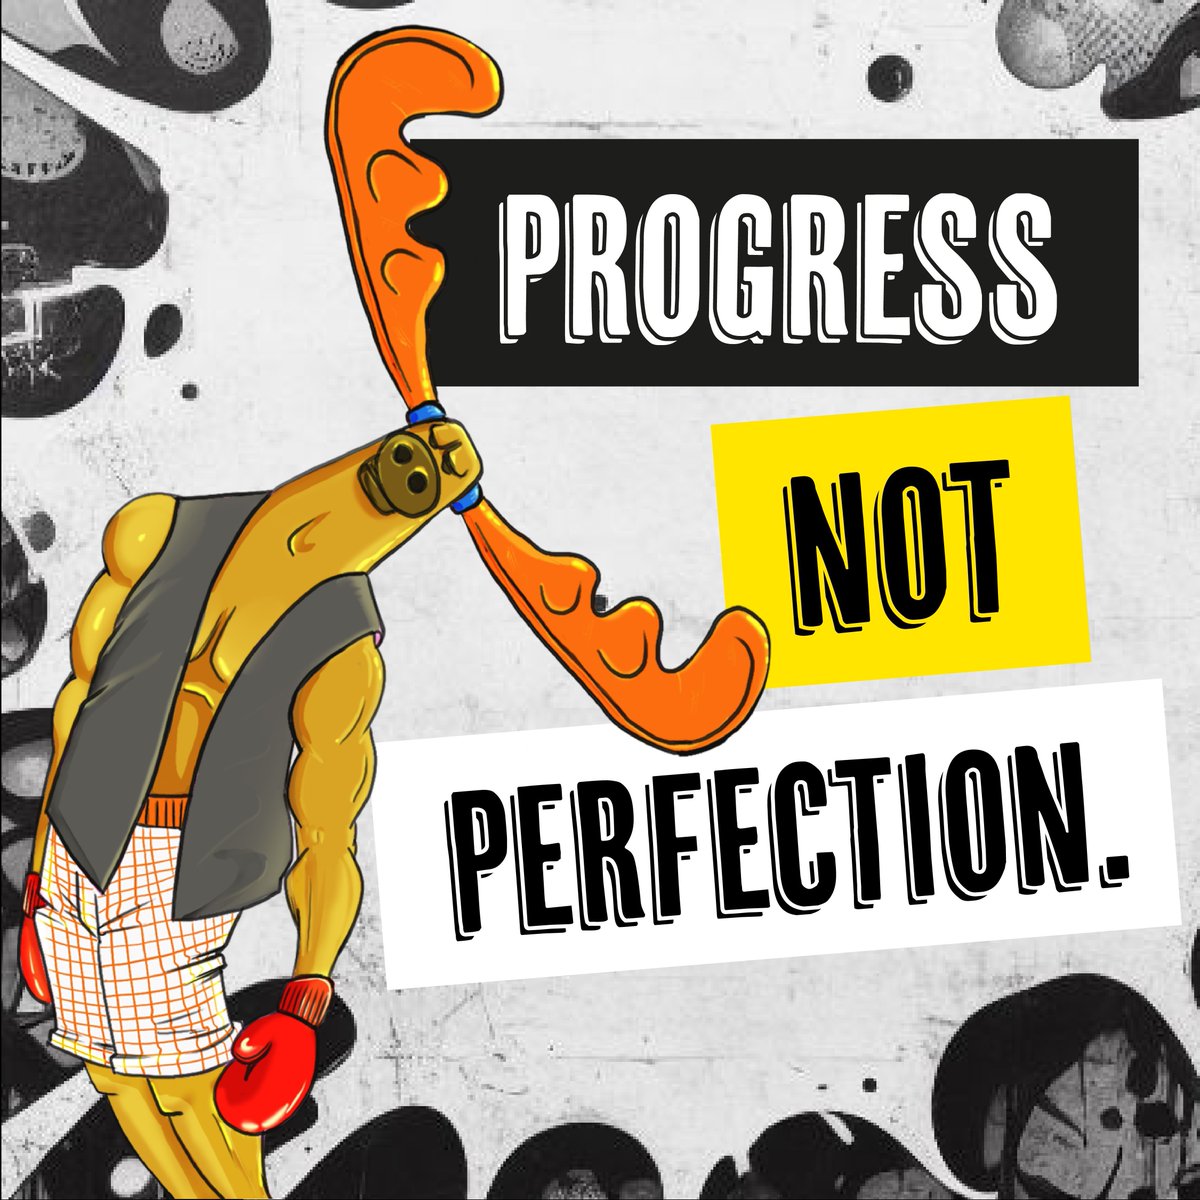 🌀When you're feeling stuck, remember: Progress Not Perfection.

Every small step you take matters🐾

🎉Celebrate your journey and be kind to yourself along the way

#MentalHealthAwarenessWeek #MentalHealth #Support #FindYourPath #grow #NevergiveUp